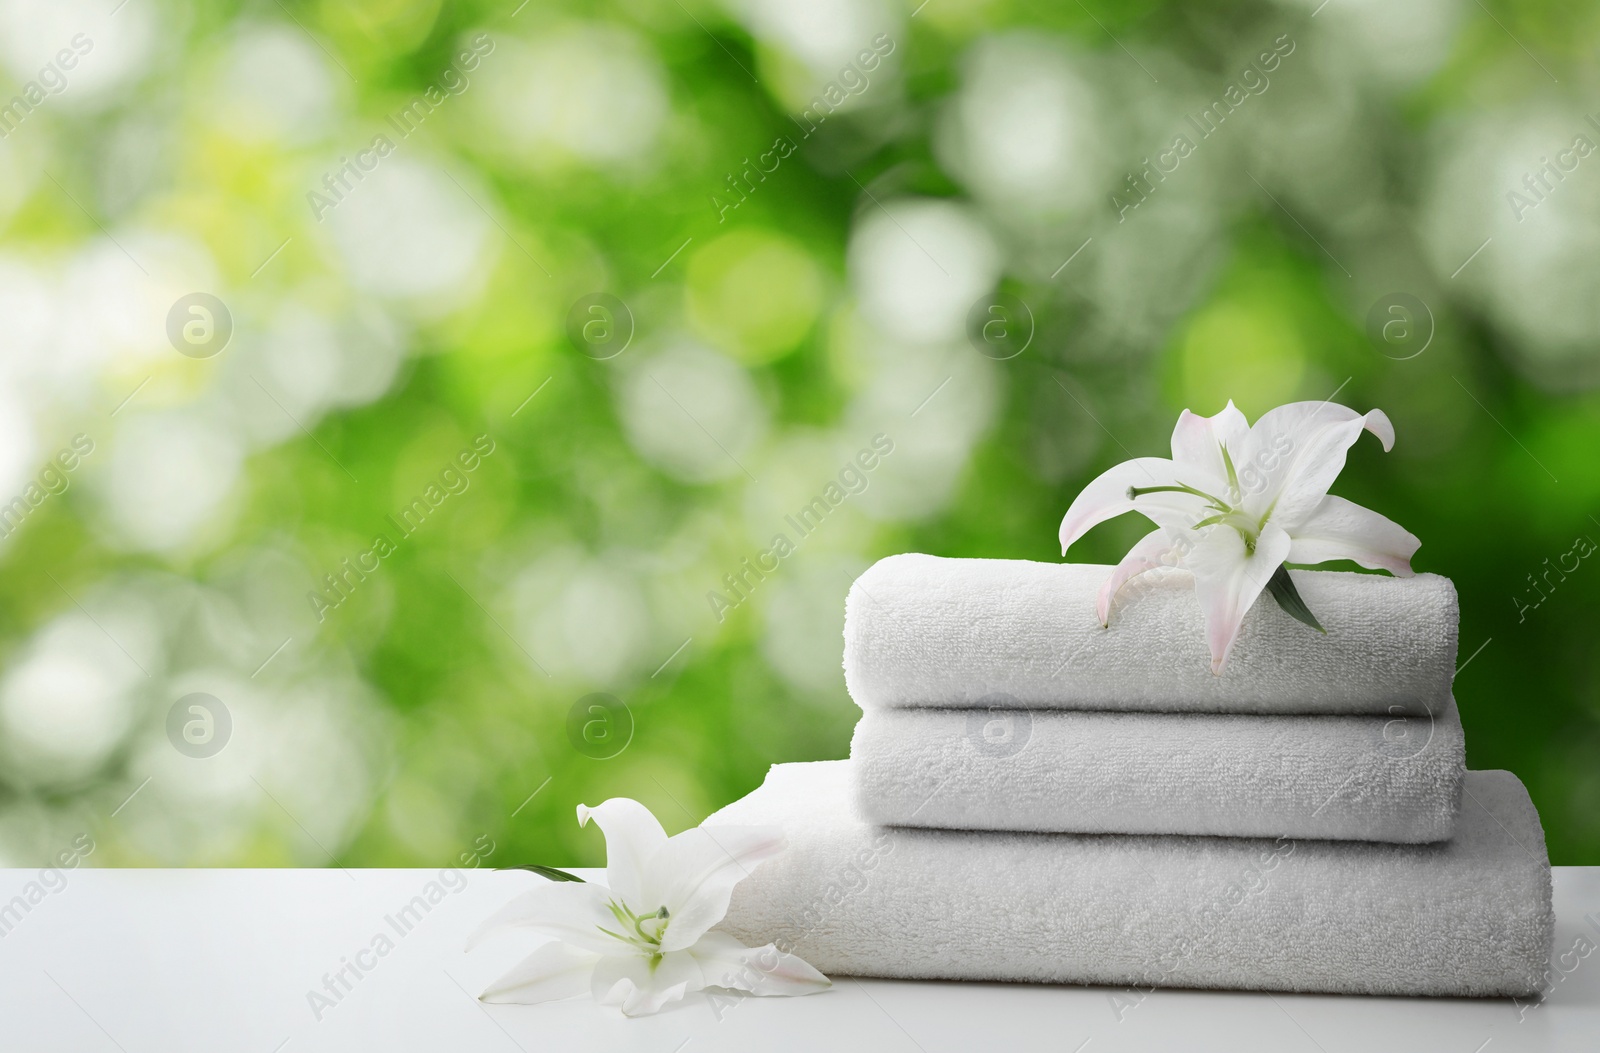 Image of Spa holiday. Stack of fresh towels with flowers on table against blurred green background, space for text